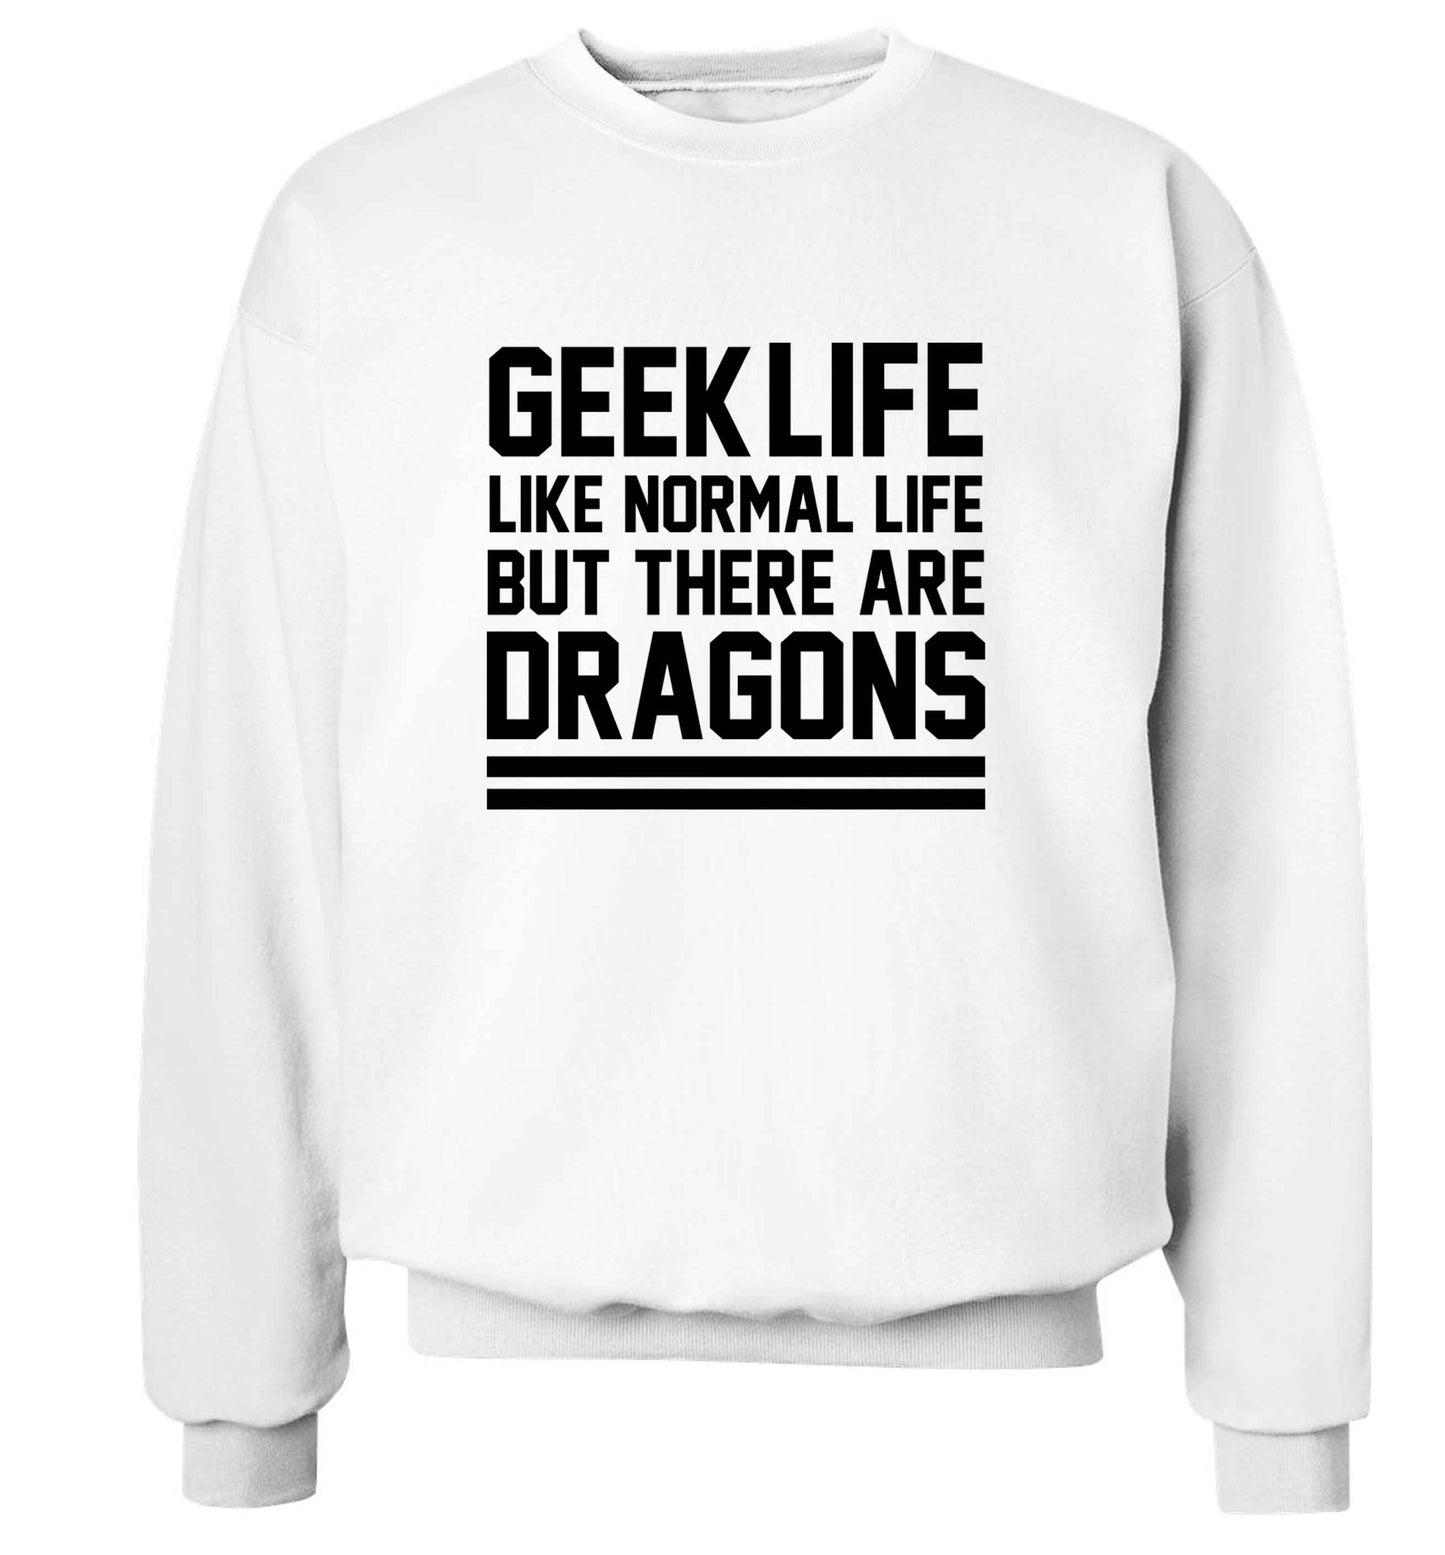 Geek life like normal life but there are dragons adult's unisex white sweater 2XL